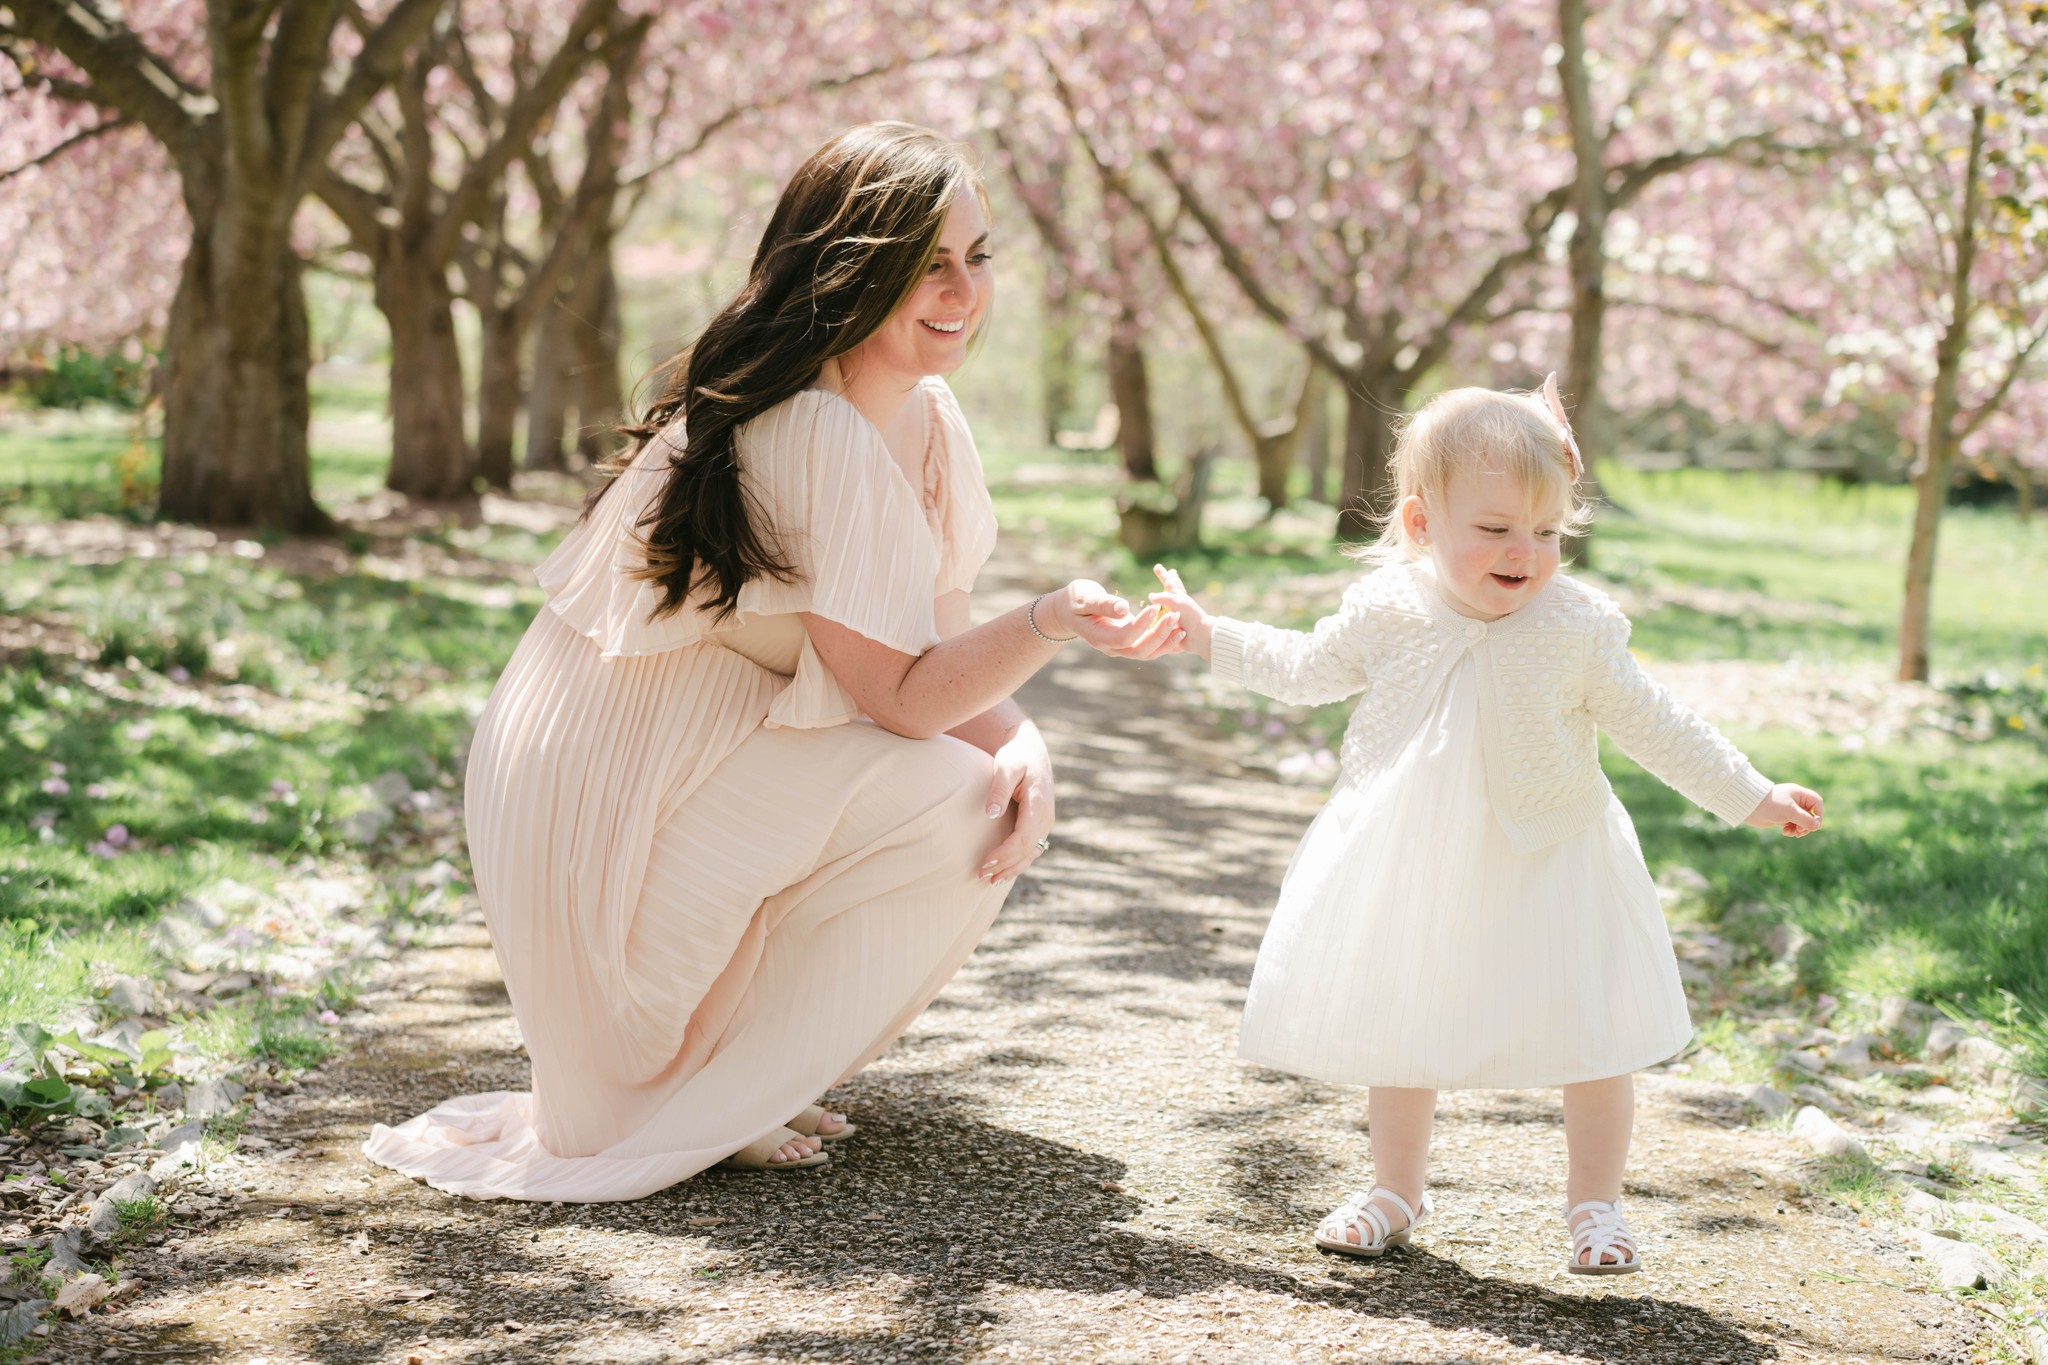 A mother plays with her toddler daughter in a white dress and sweater in a park path lined with trees blooming pink flowers luxey little ones